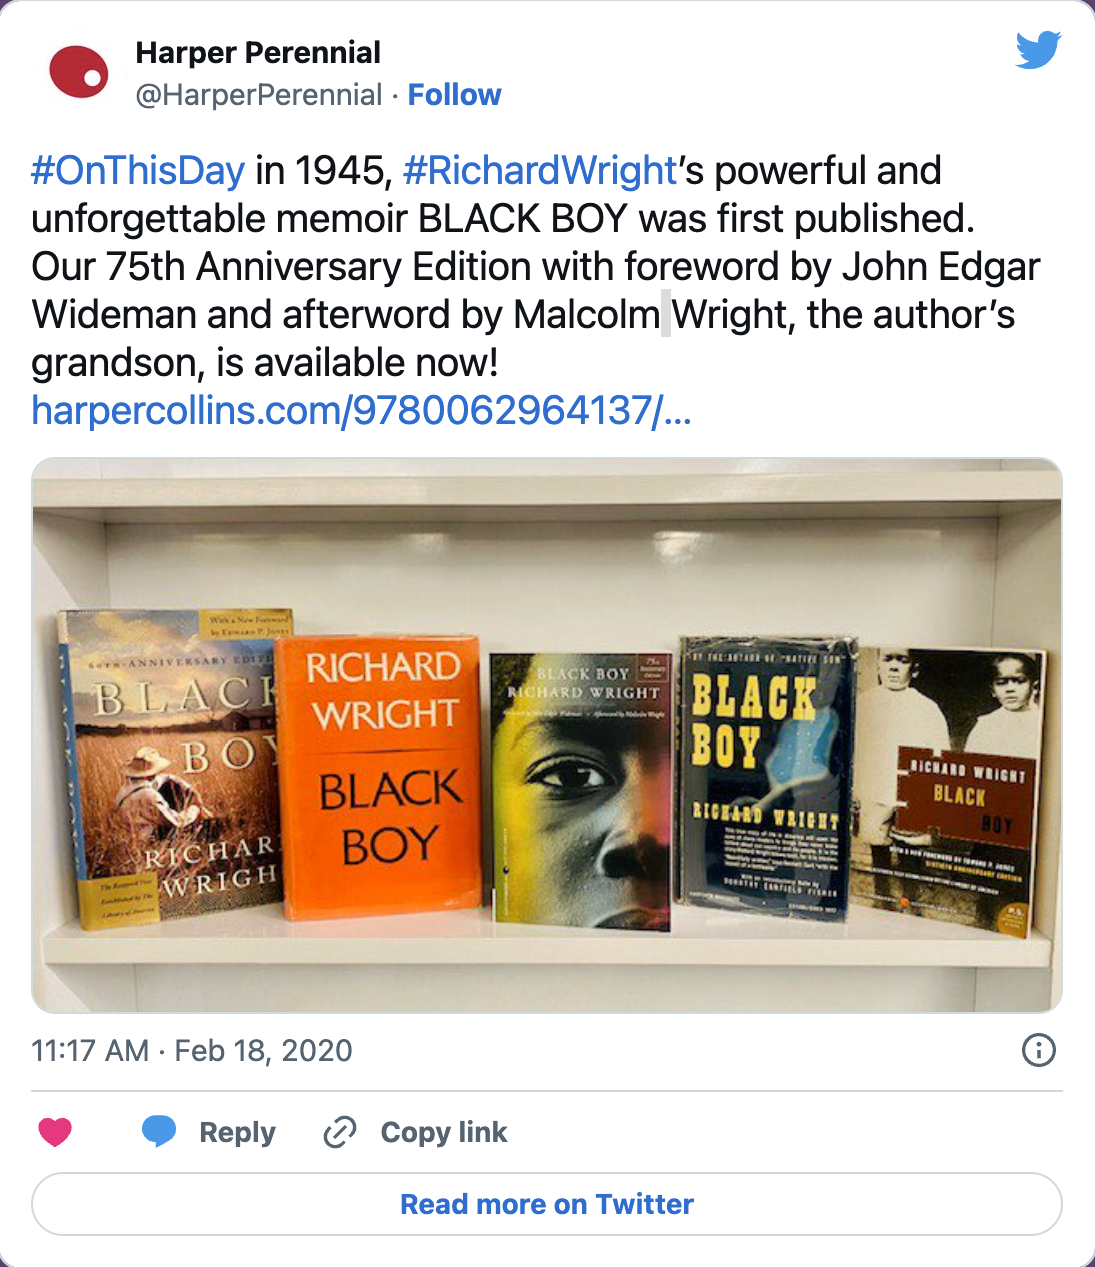 "A tweet displaying a picture of several 'Black Boy' books with different covers"